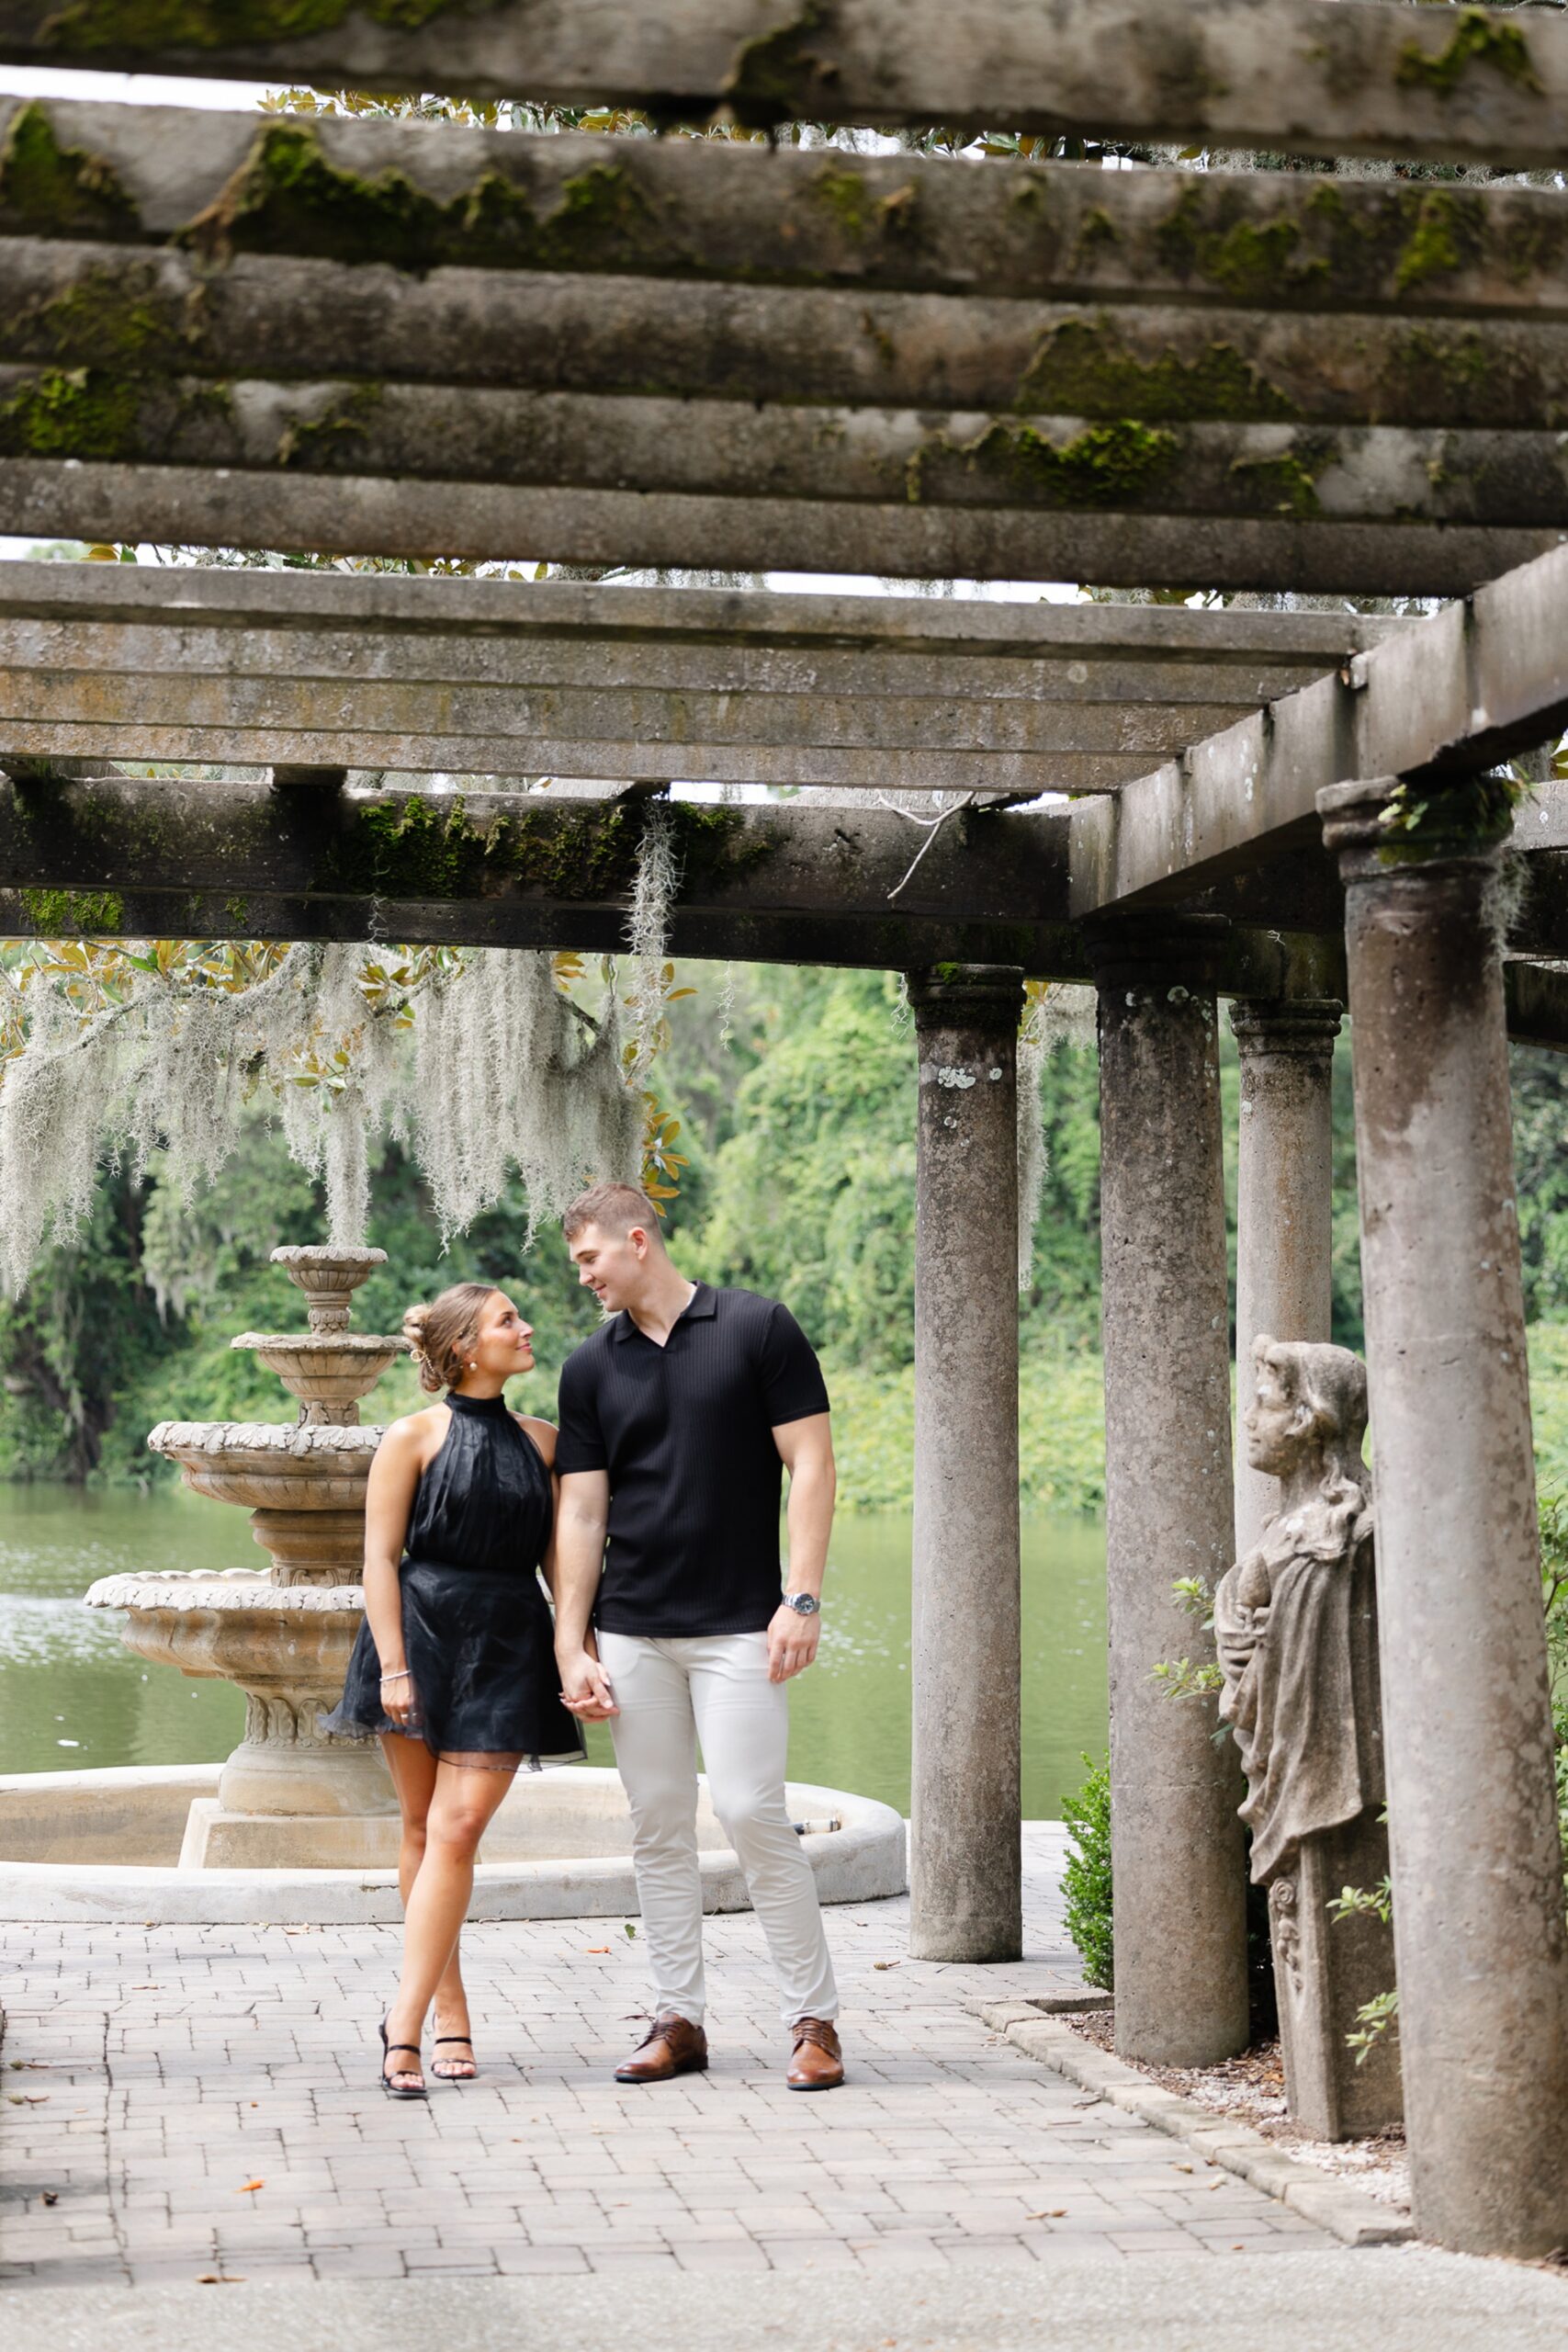 A couple holds hands and walks under a stone pergola with a fountain while wearing black